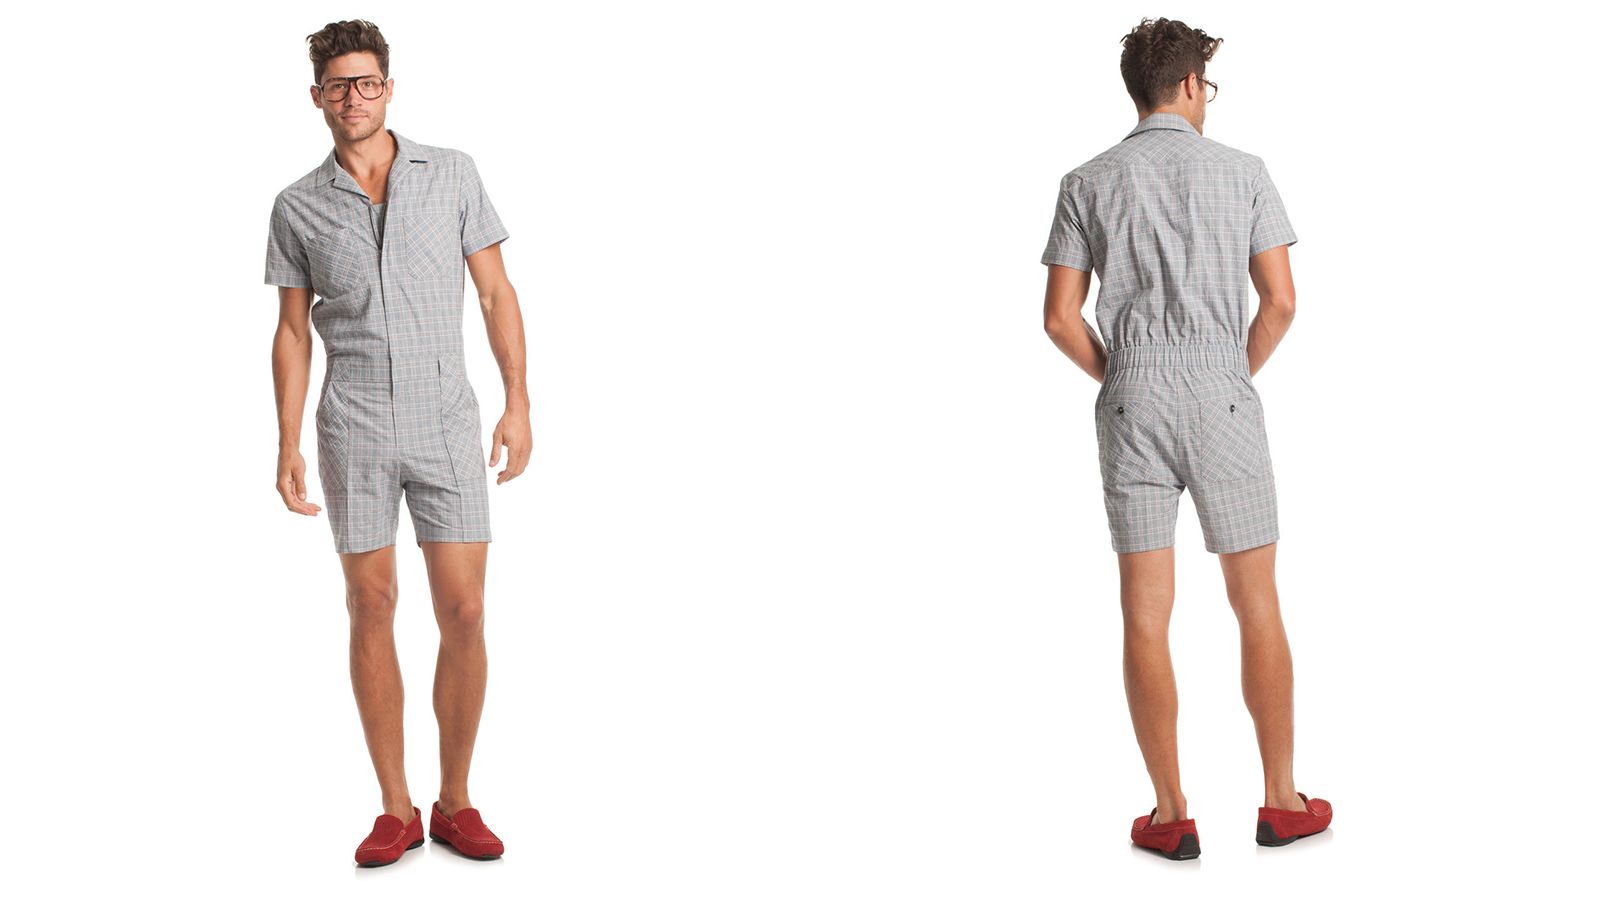 Forfatning Bære Hr Why everyone is talking about male rompers | CNN